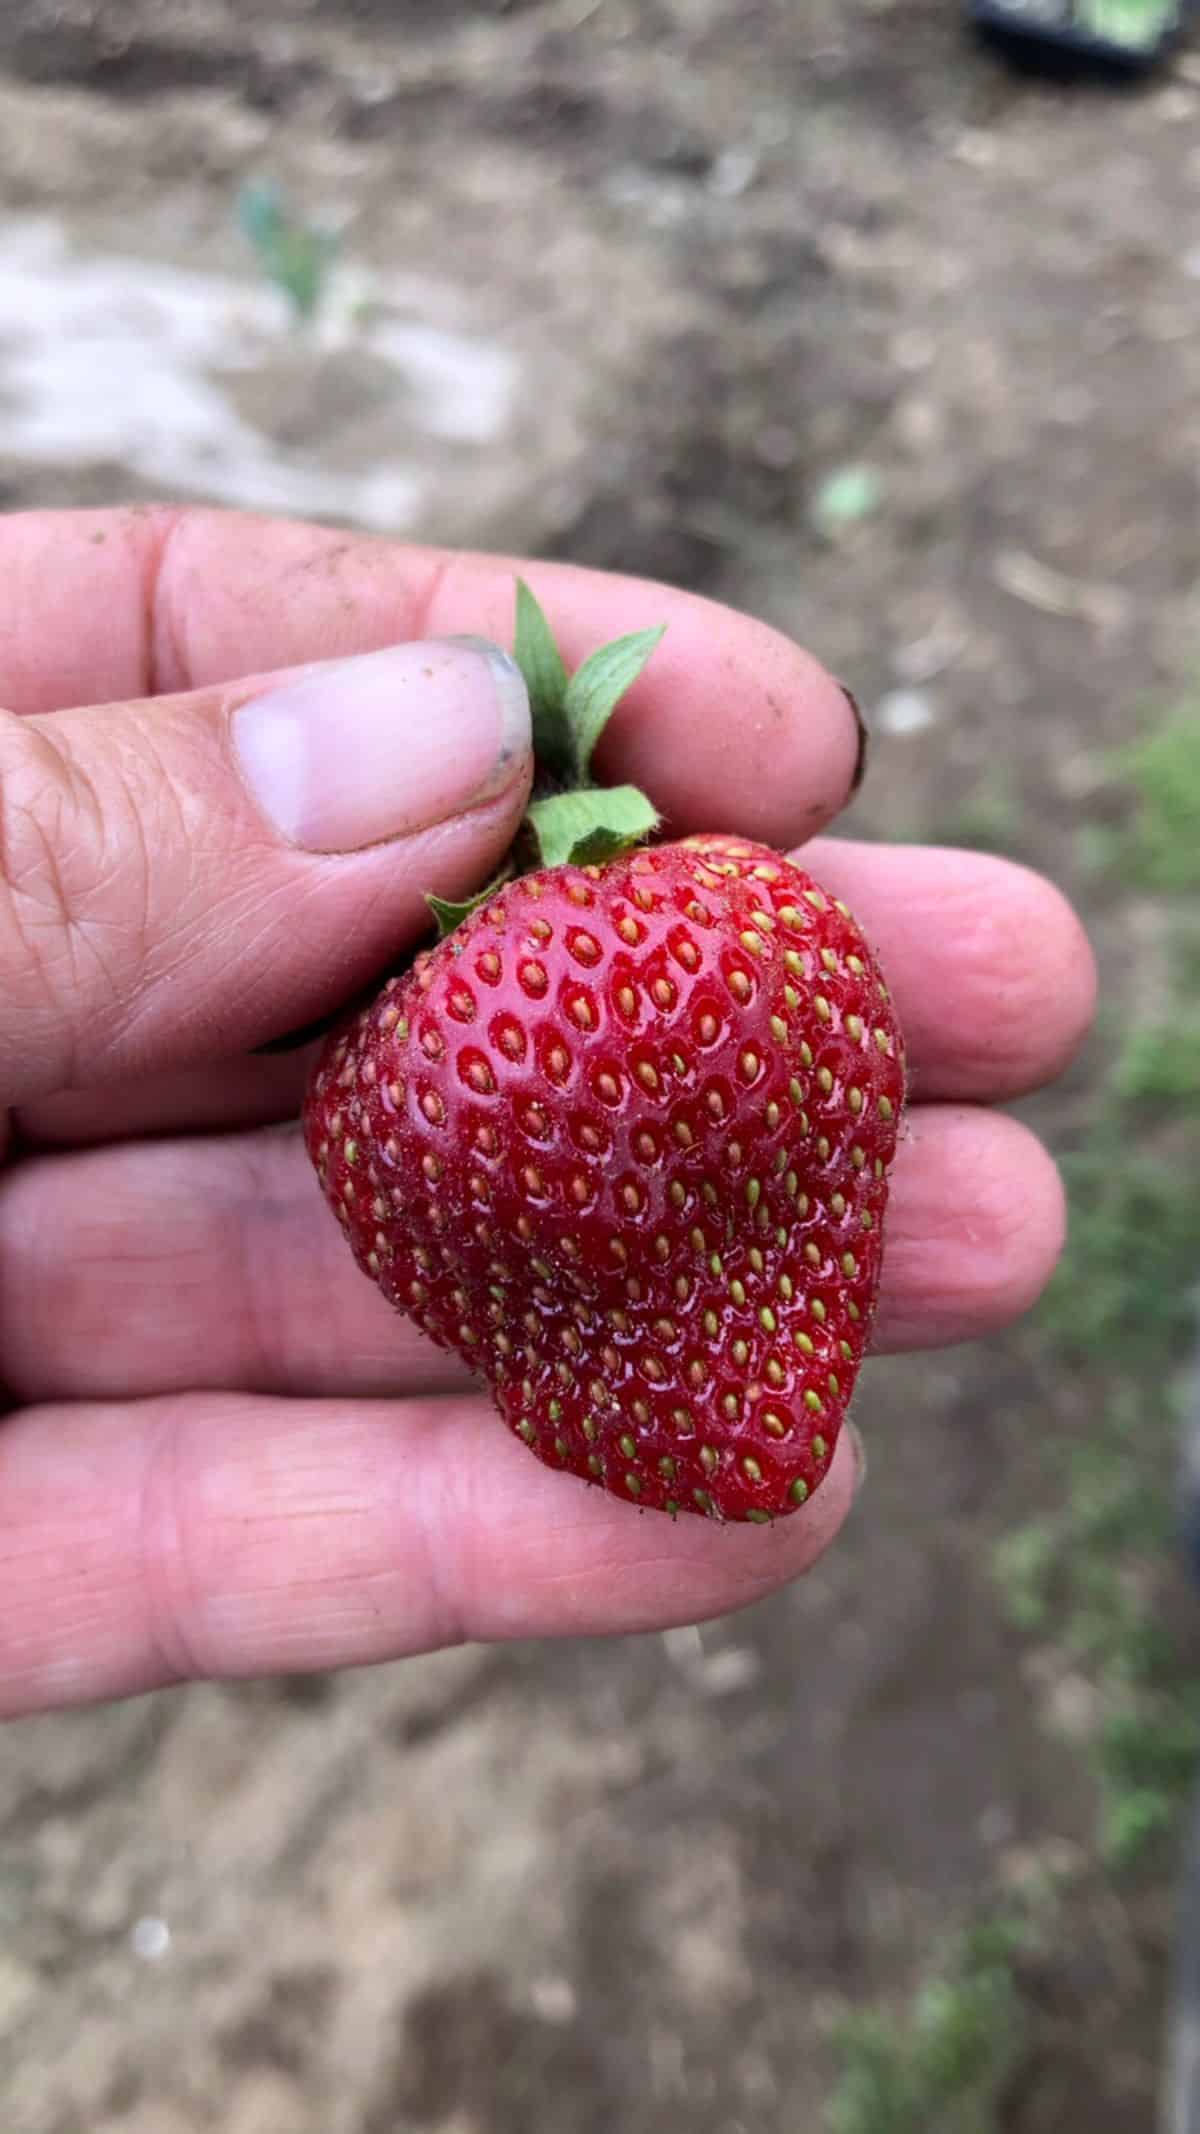 A uniformly ripe red strawberry held in a gardener's hand